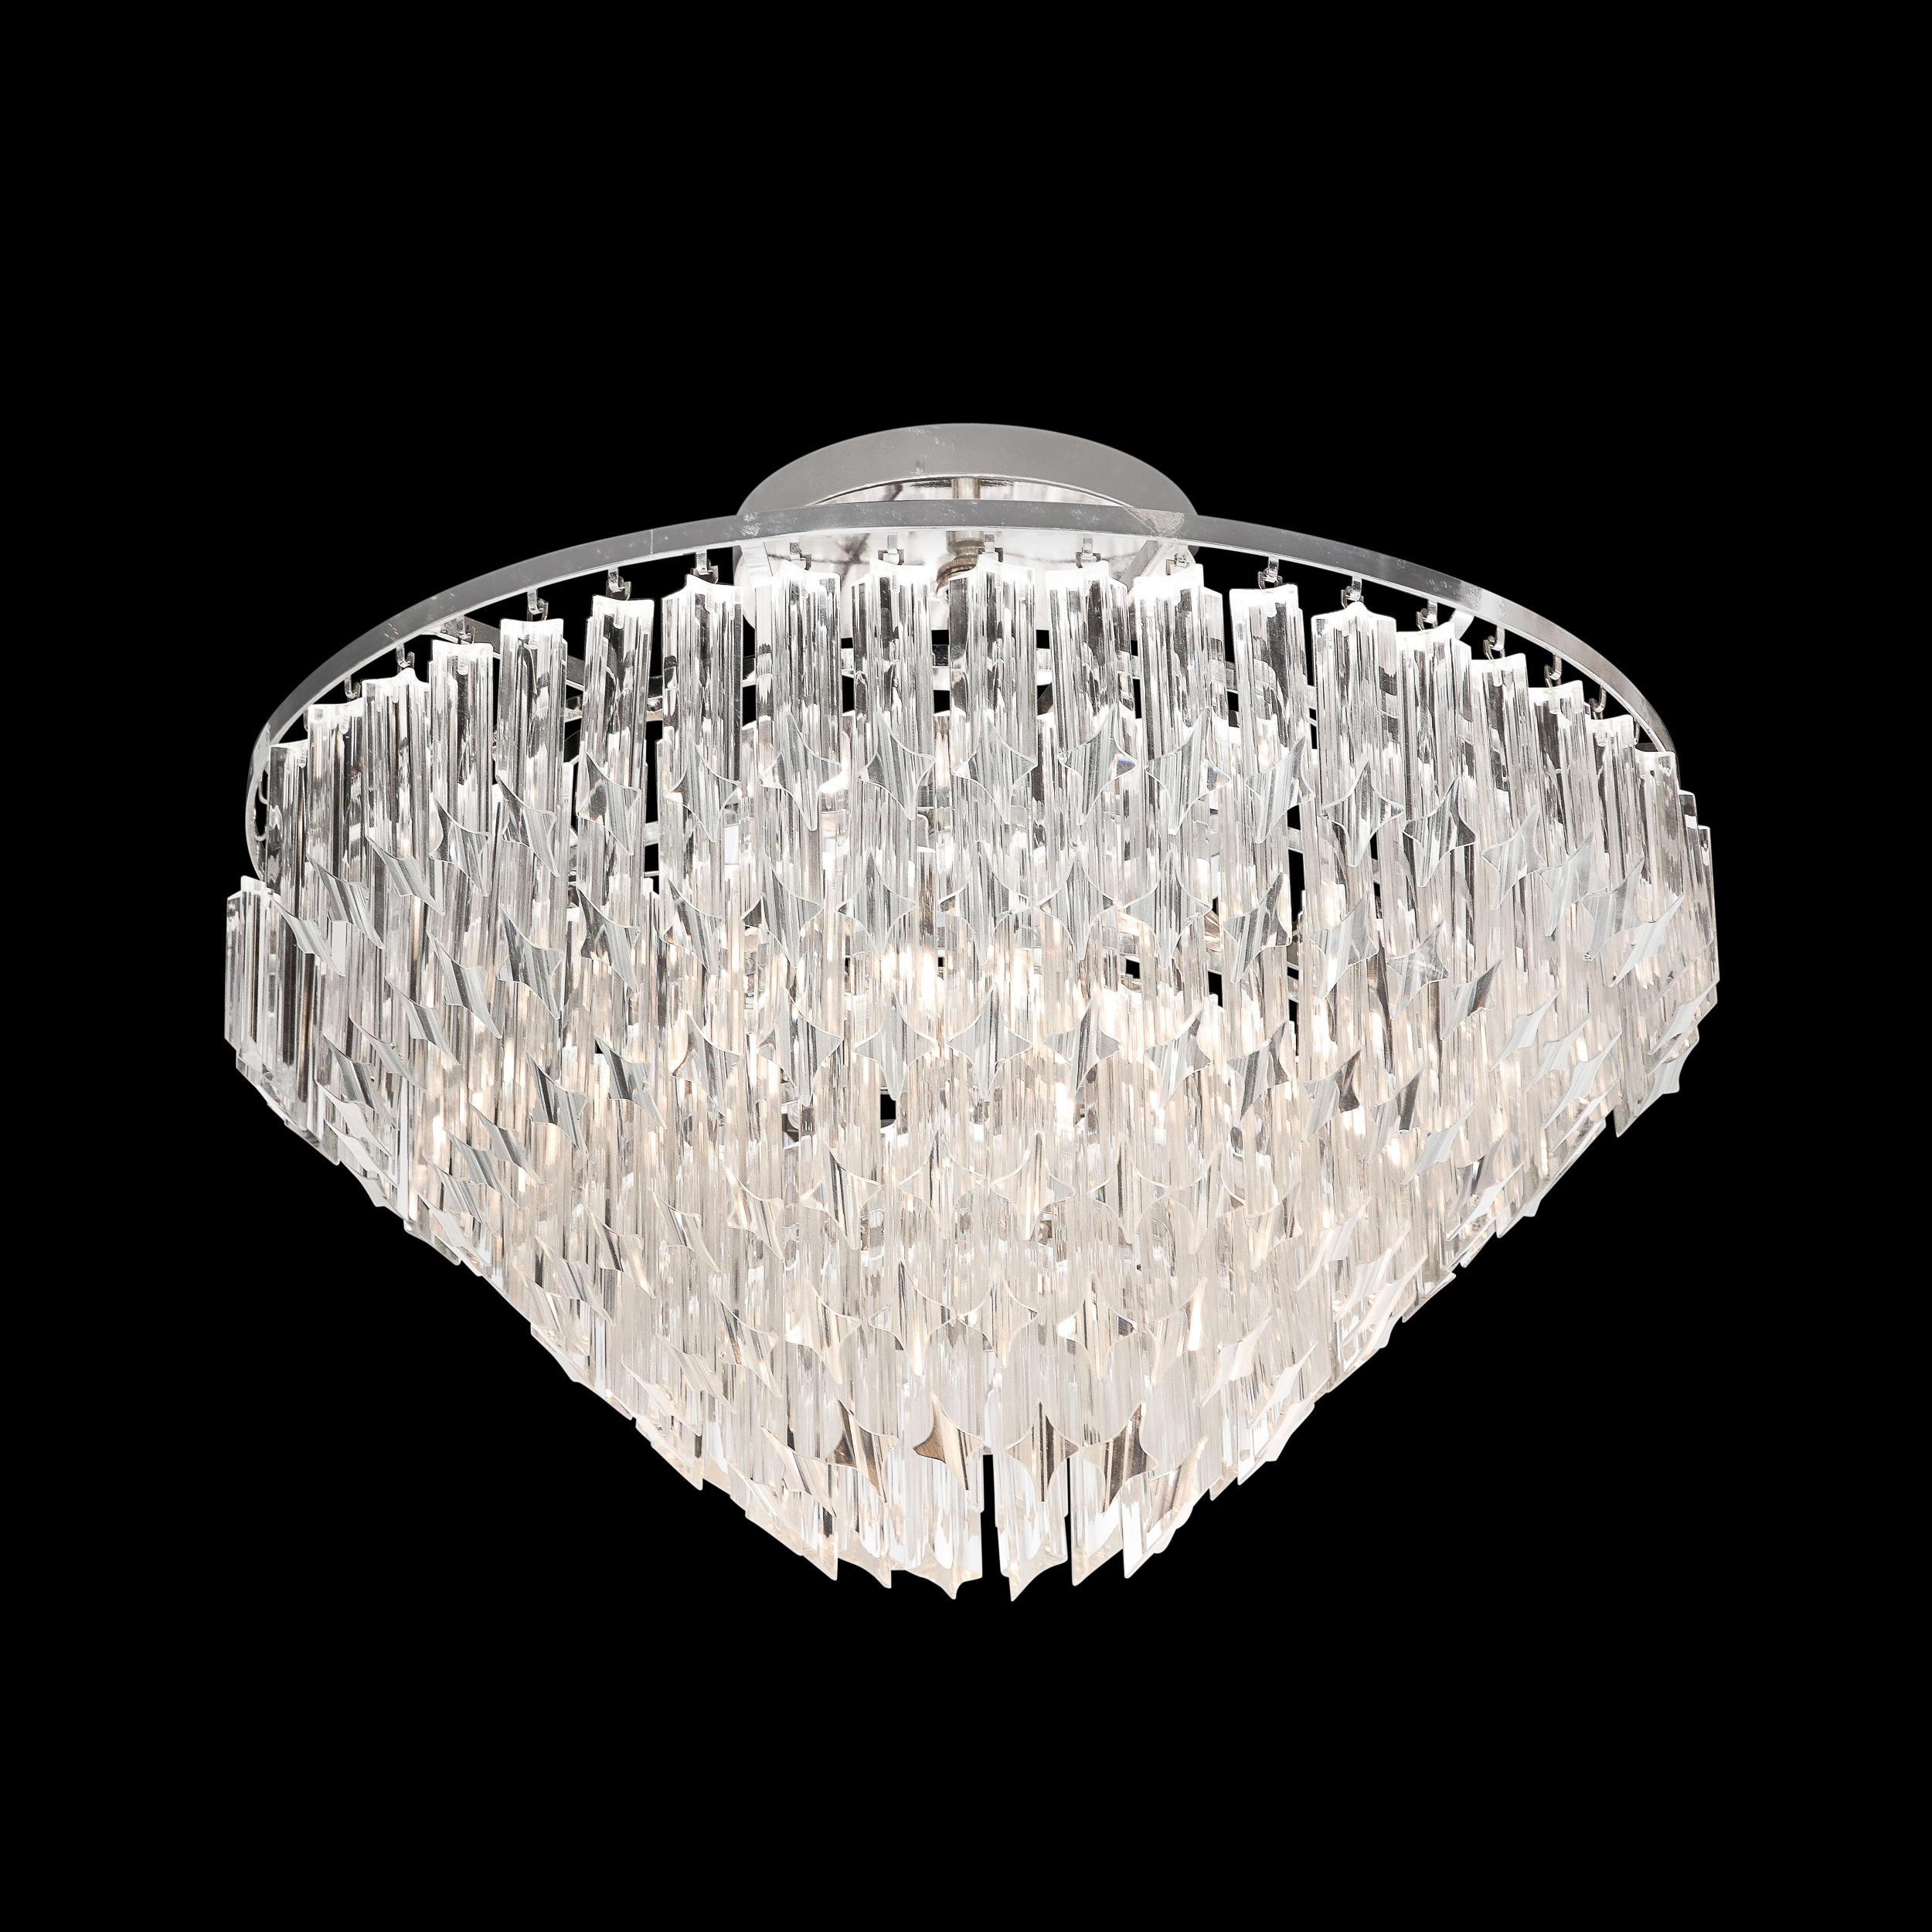 This elegant modernist semi flush chandelier was handblown in Murano, Italy- the island off the coast of Venice renowned for centuries for its superlative glass production. It features a conical form composed of six tiers of translucent camer